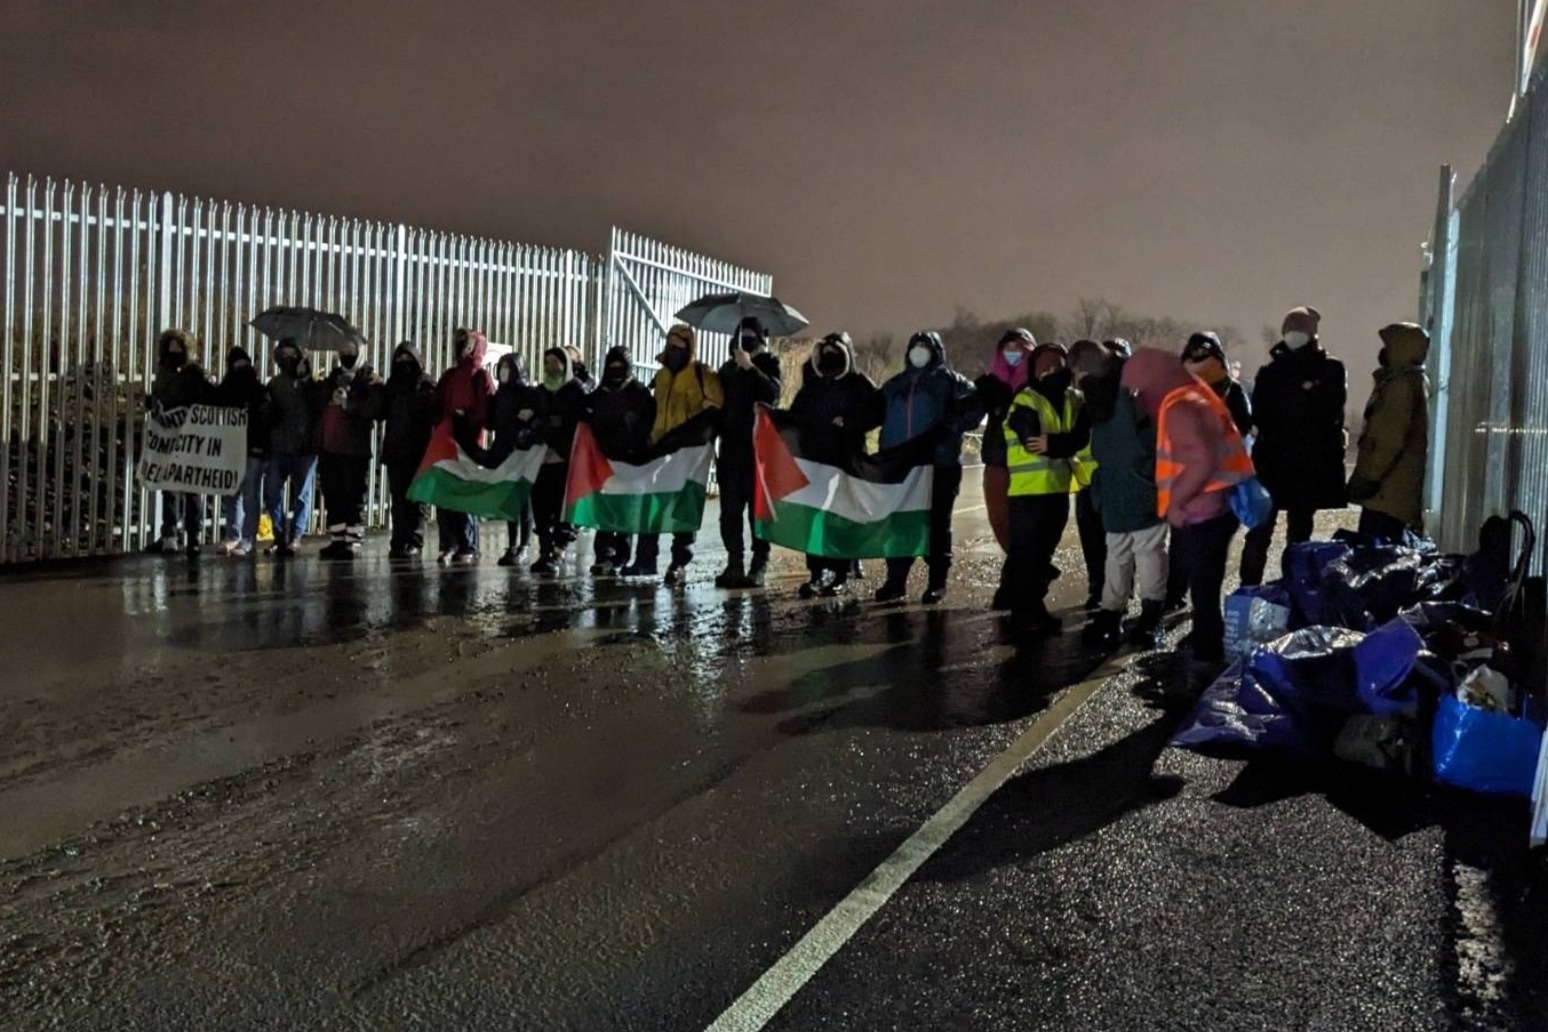 Campaigners blockade BAE Systems site in Glasgow over ‘Israel ties’ 